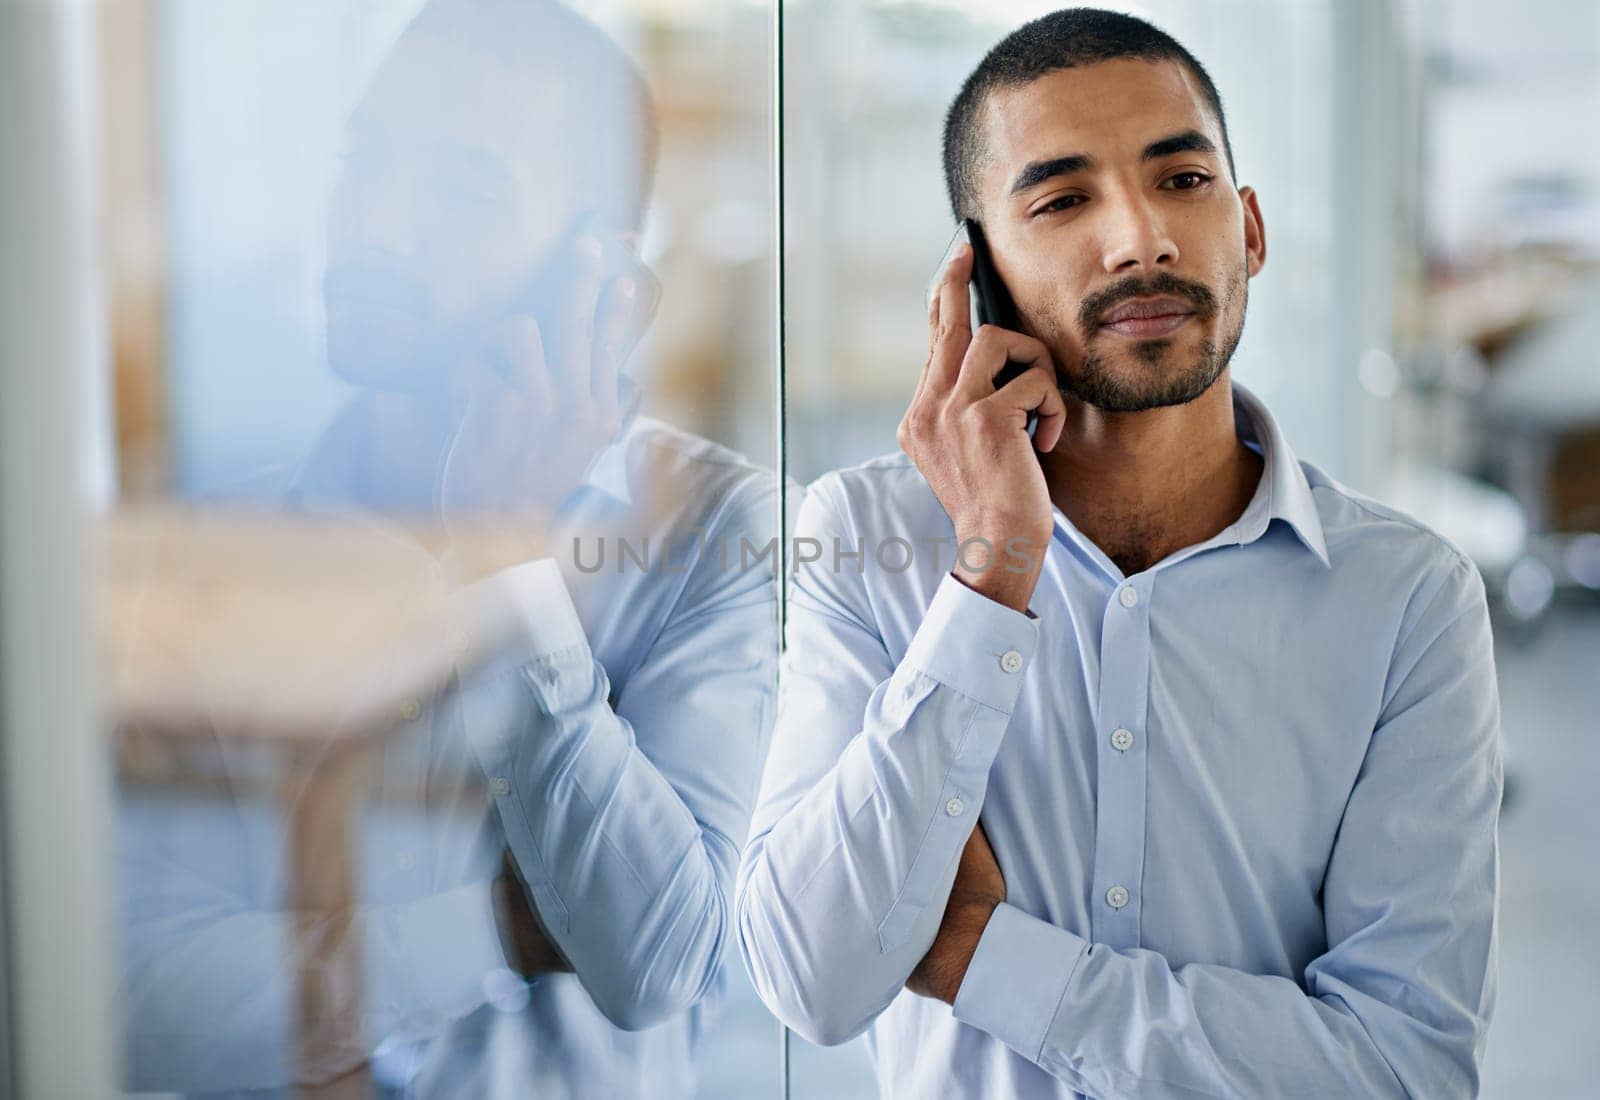 Man, thinking and planning in office with phone call to client with real estate opportunity to invest. Property, realtor and chat to contact with ideas for future decision in business or investment.